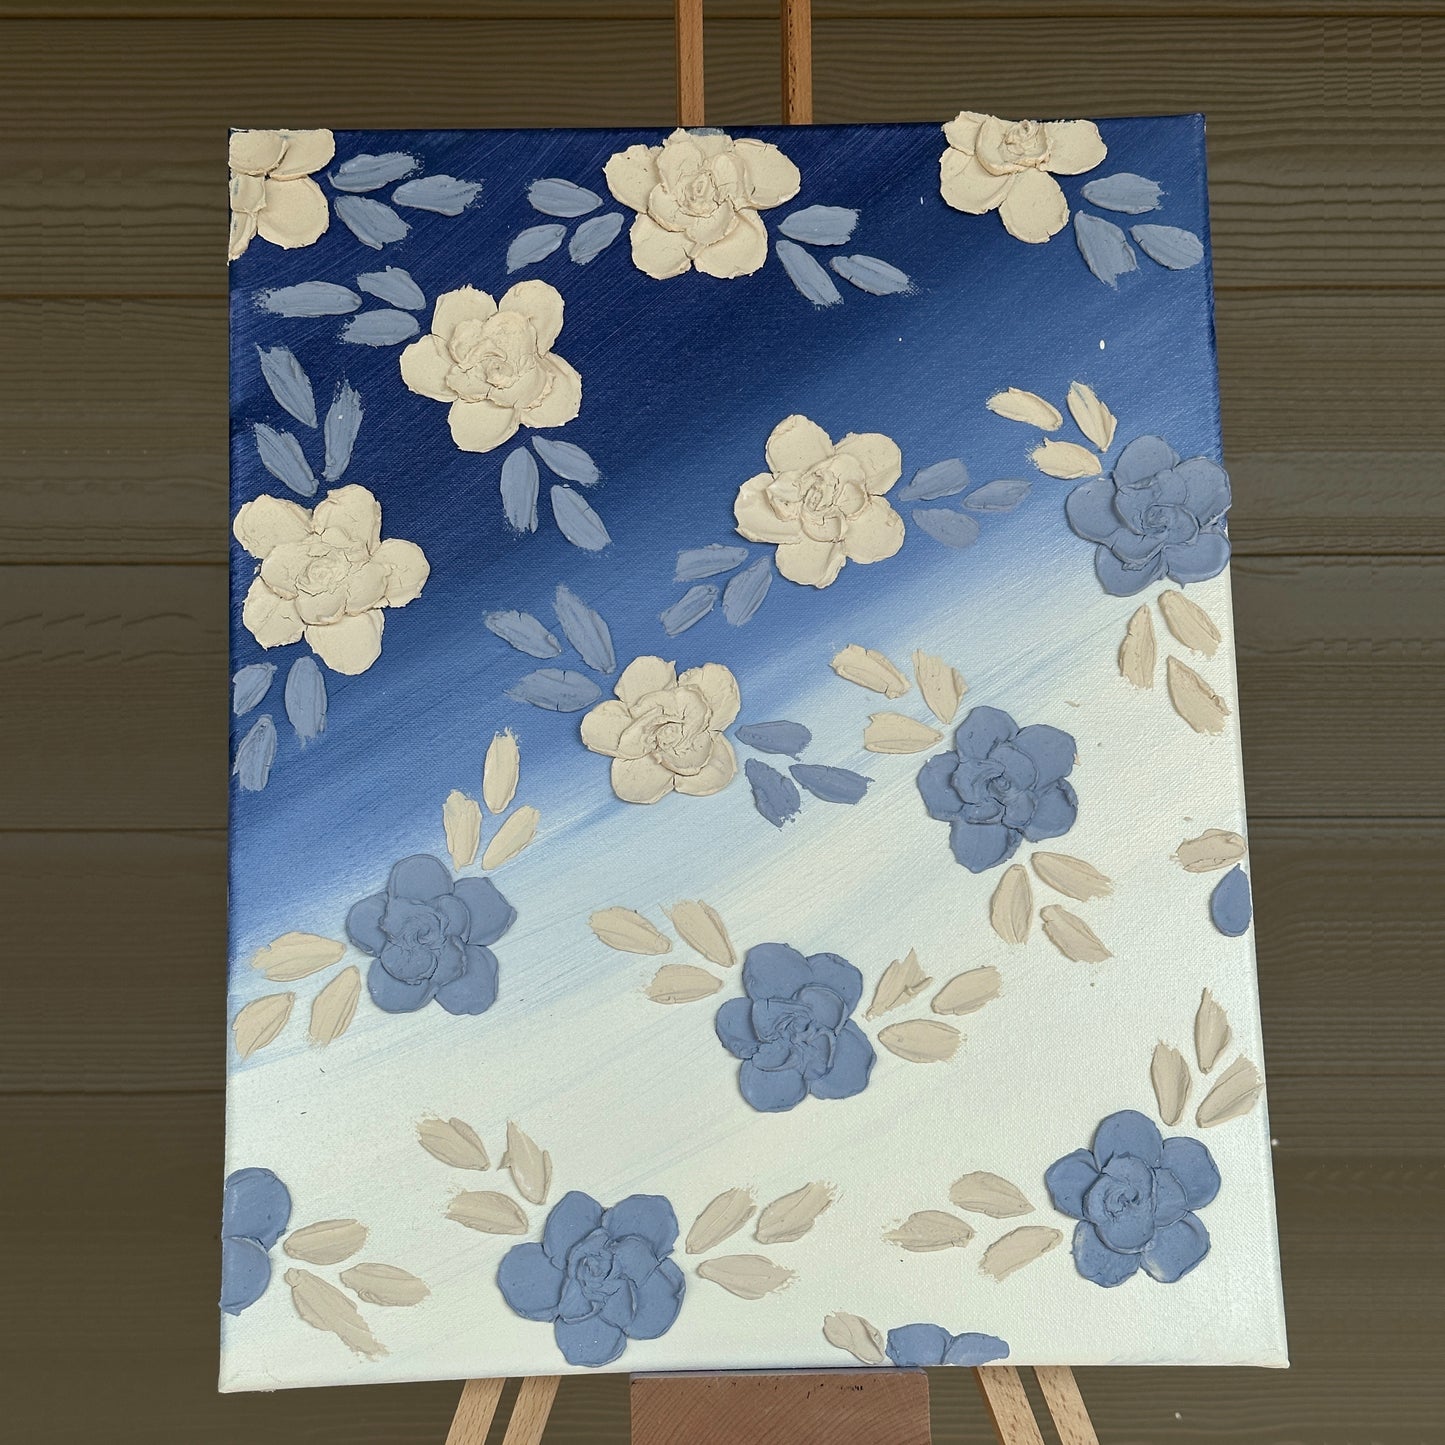 3D Texture Light Blue and Cream Roses on Blue Ombre 16"x20"